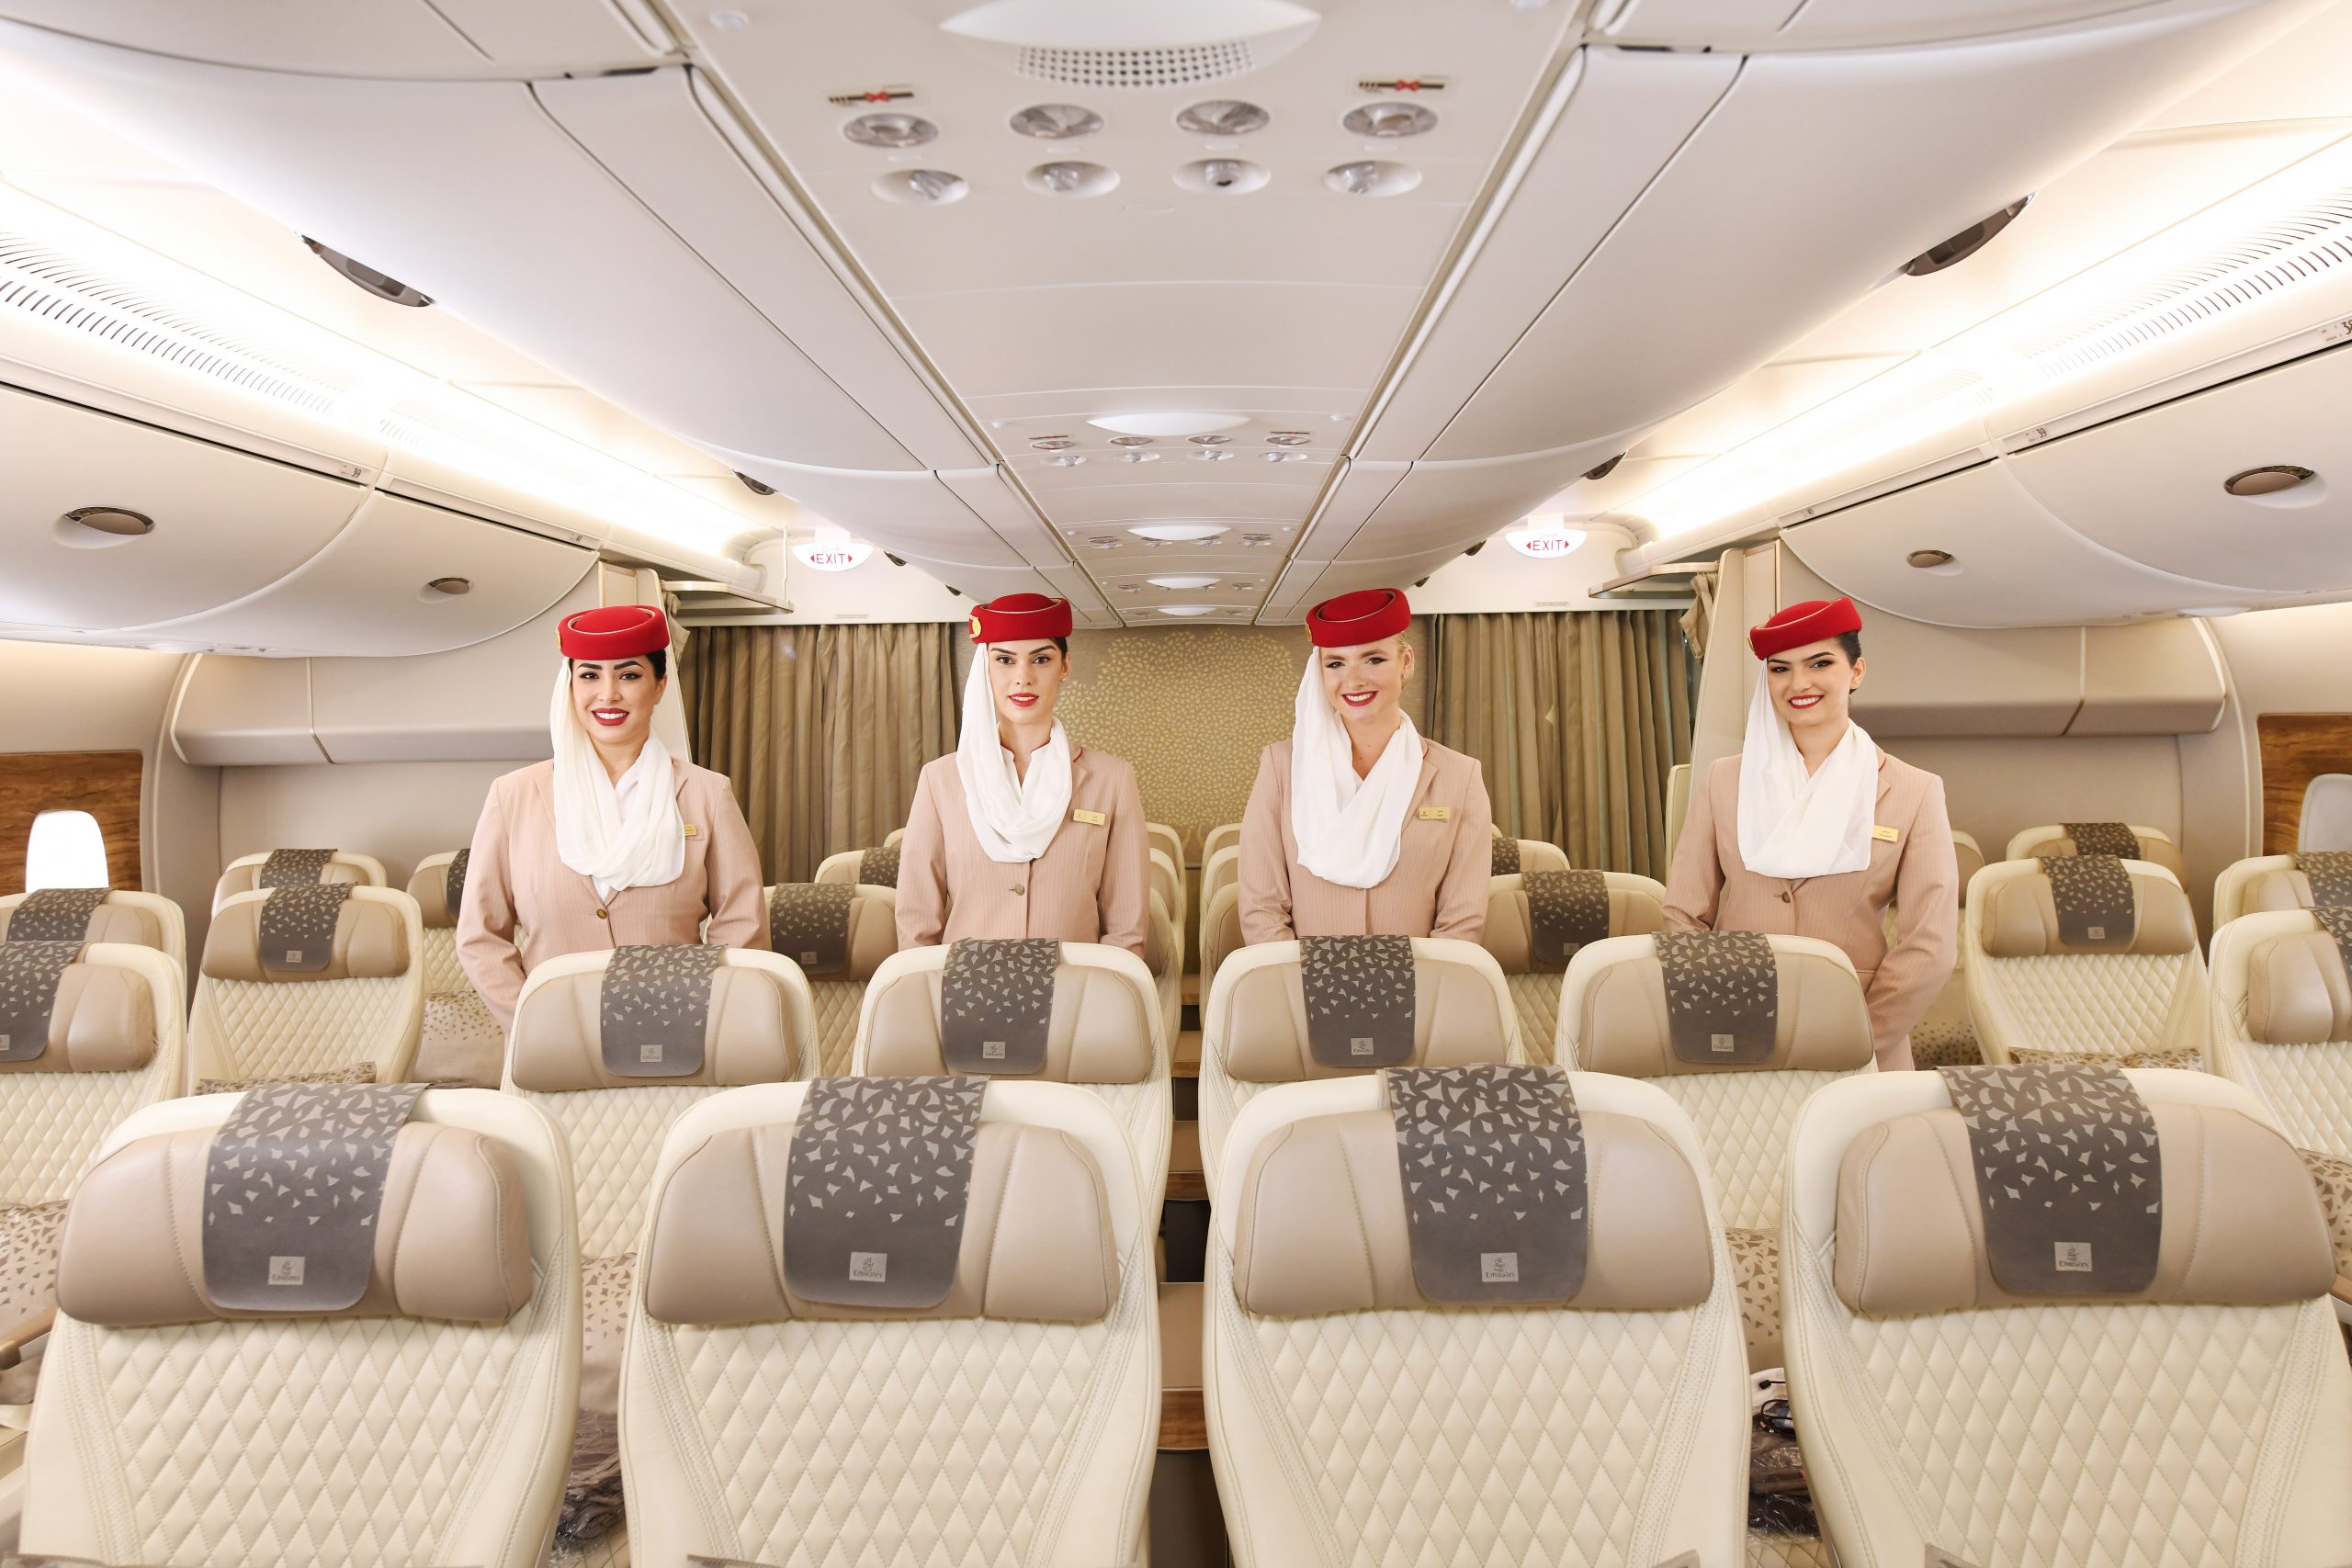 PHOTOS First Look at Emirates’ Premium Economy Cabin The Nibbler